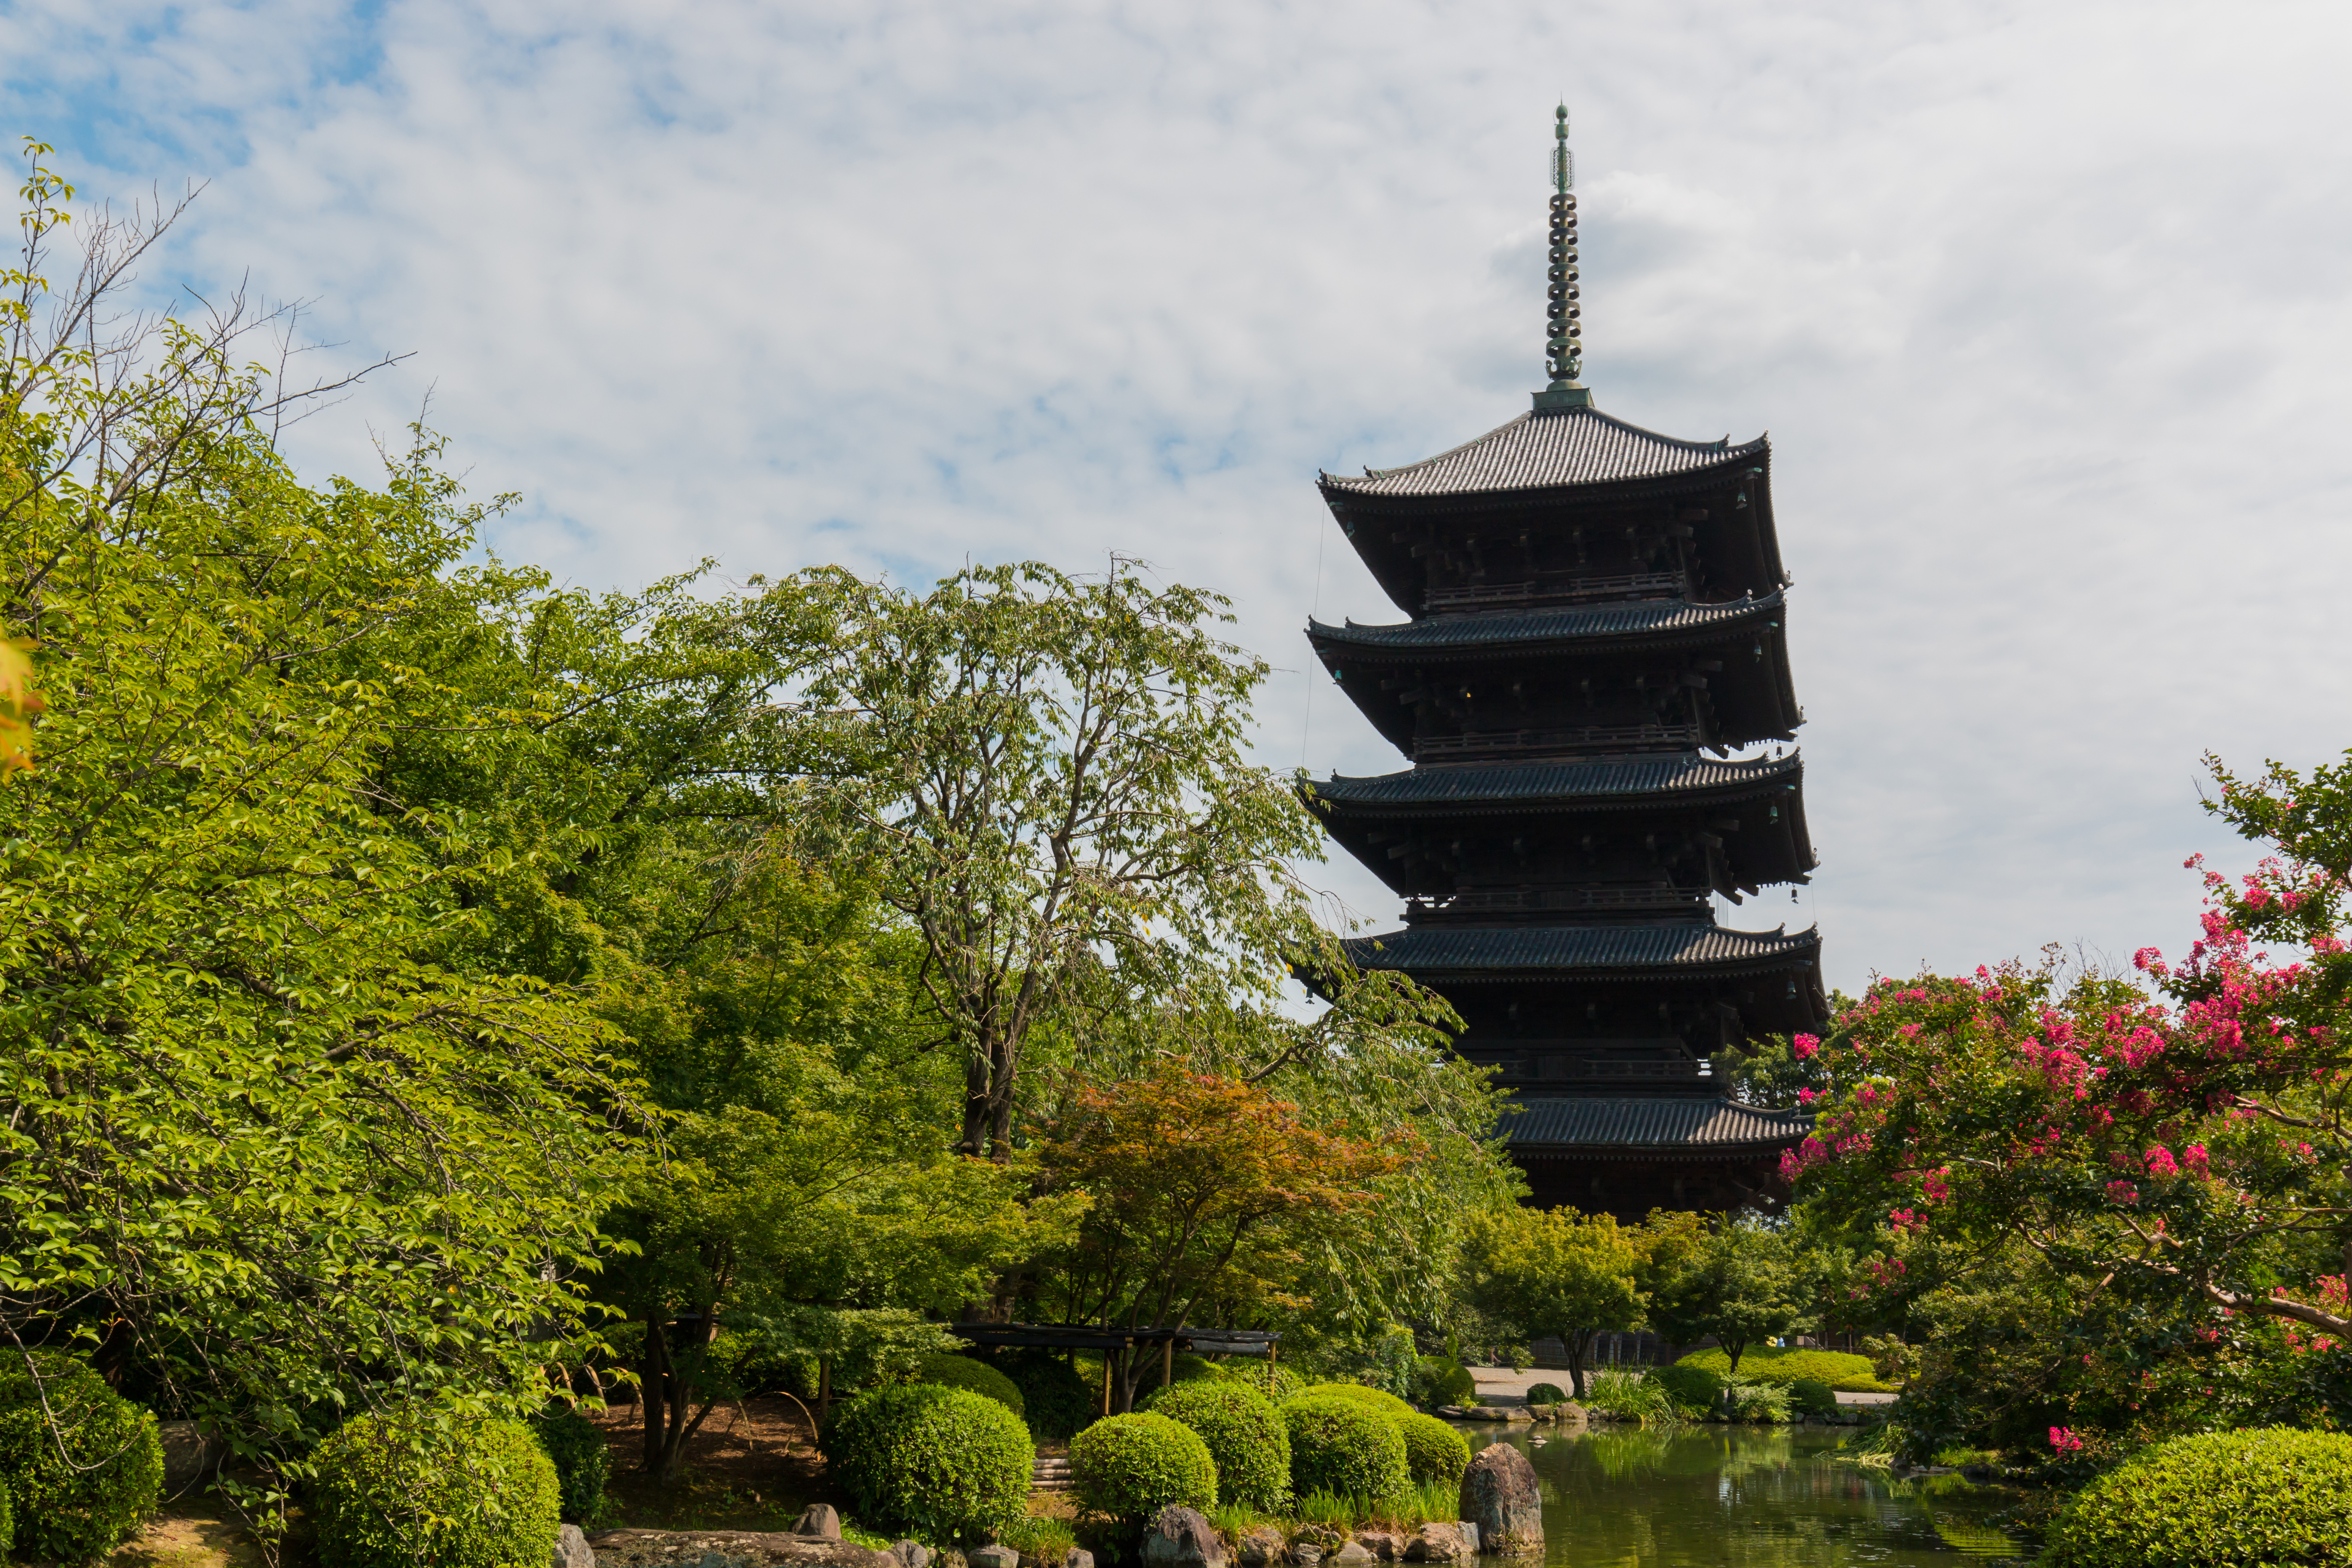 Toji temple is a Buddhist temple of the Shingon sect in Kyoto, J